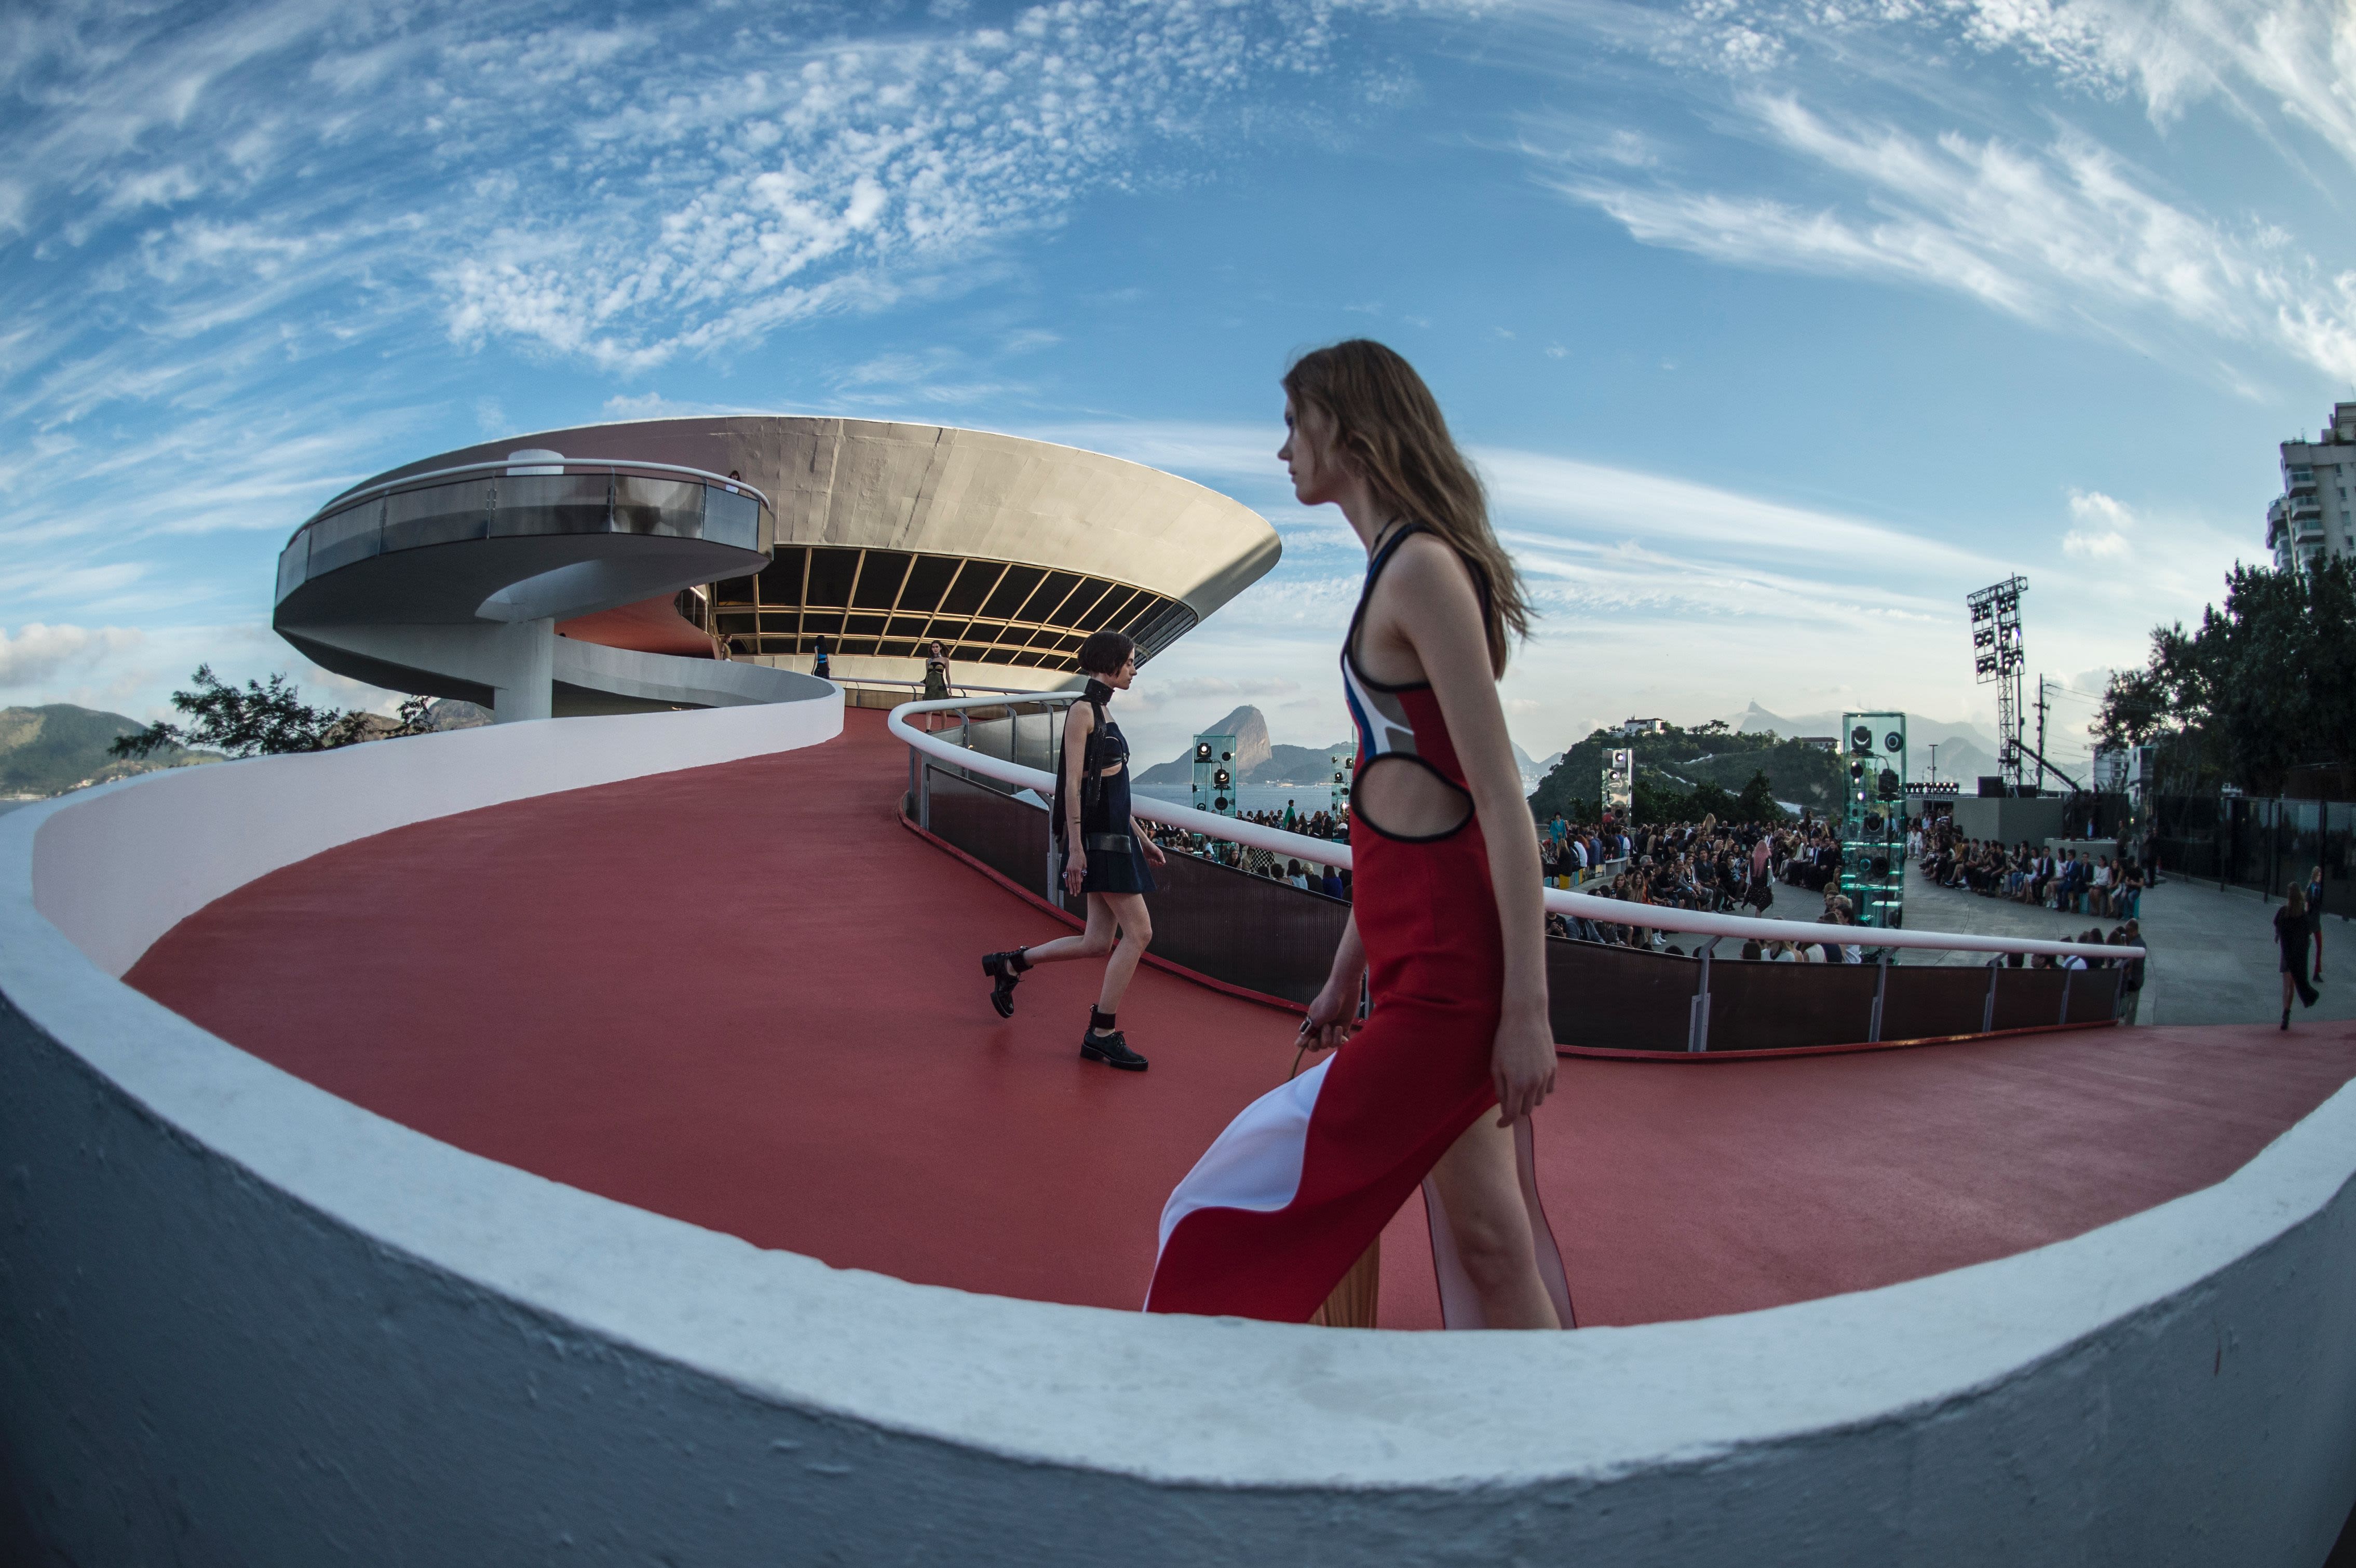 Images. Louis Vuitton Goes to Brazil for Resort 2017